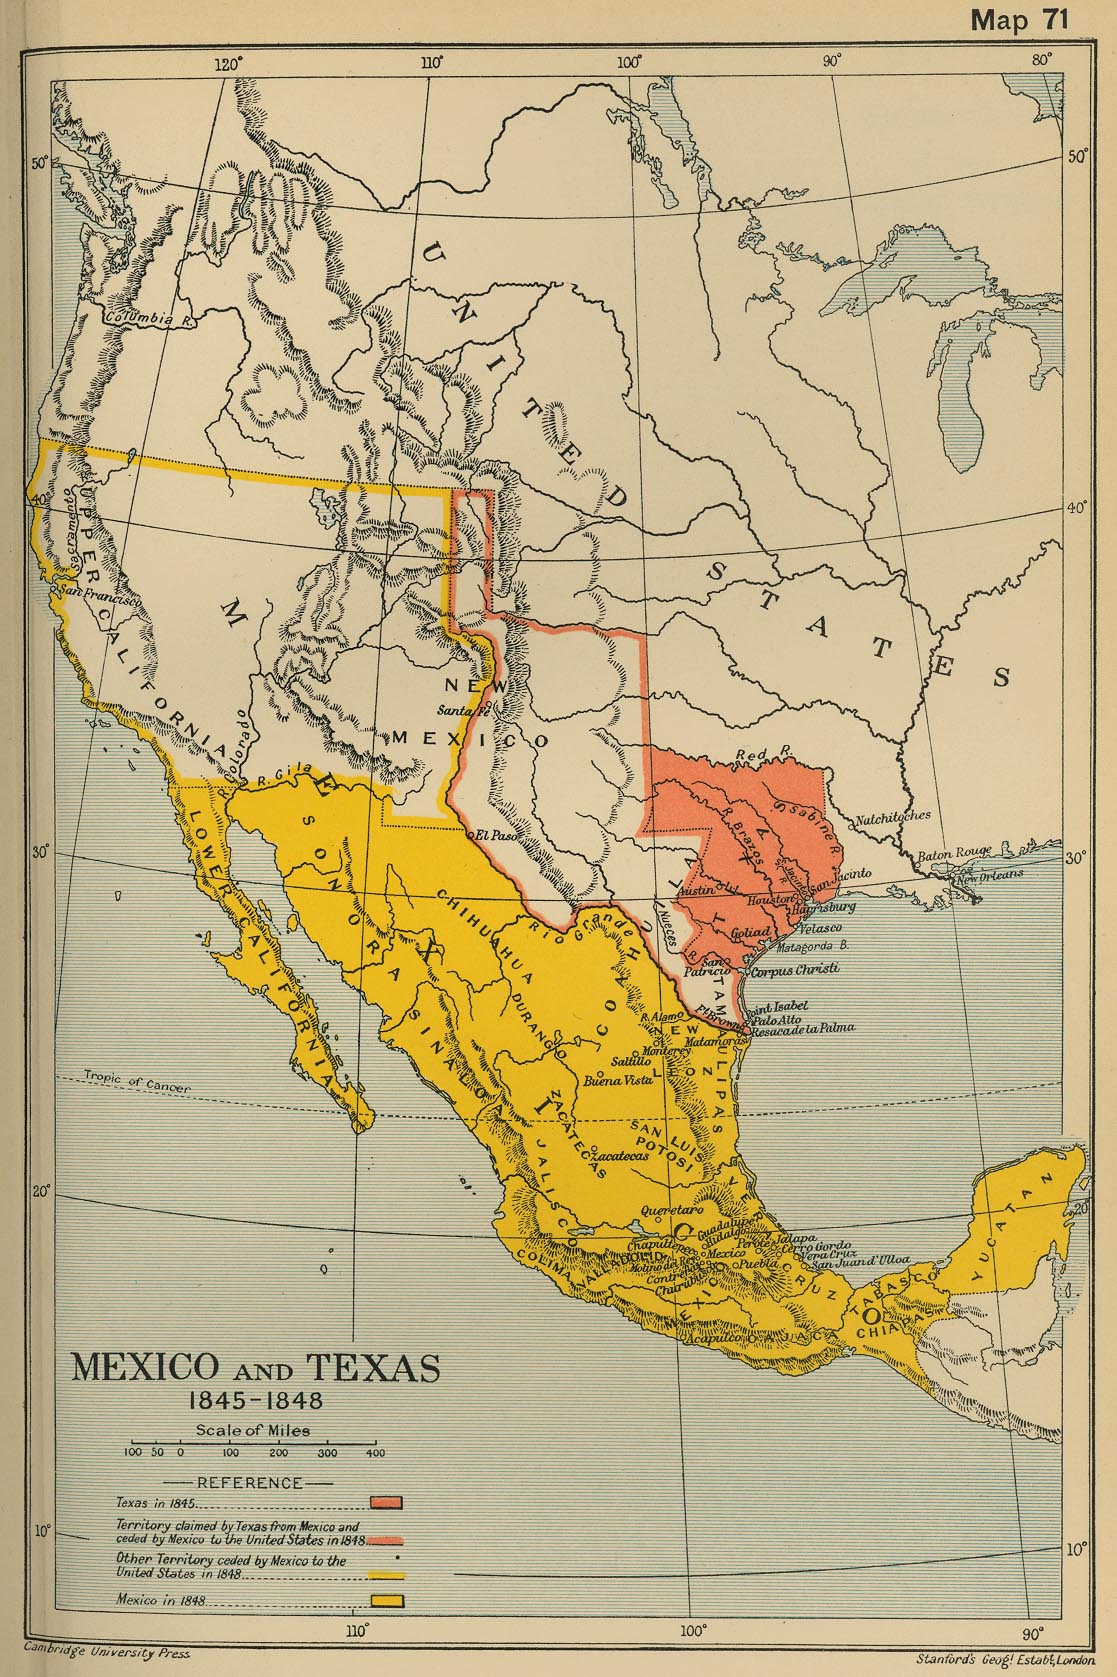 Map of Mexico and Texas 1845-1845